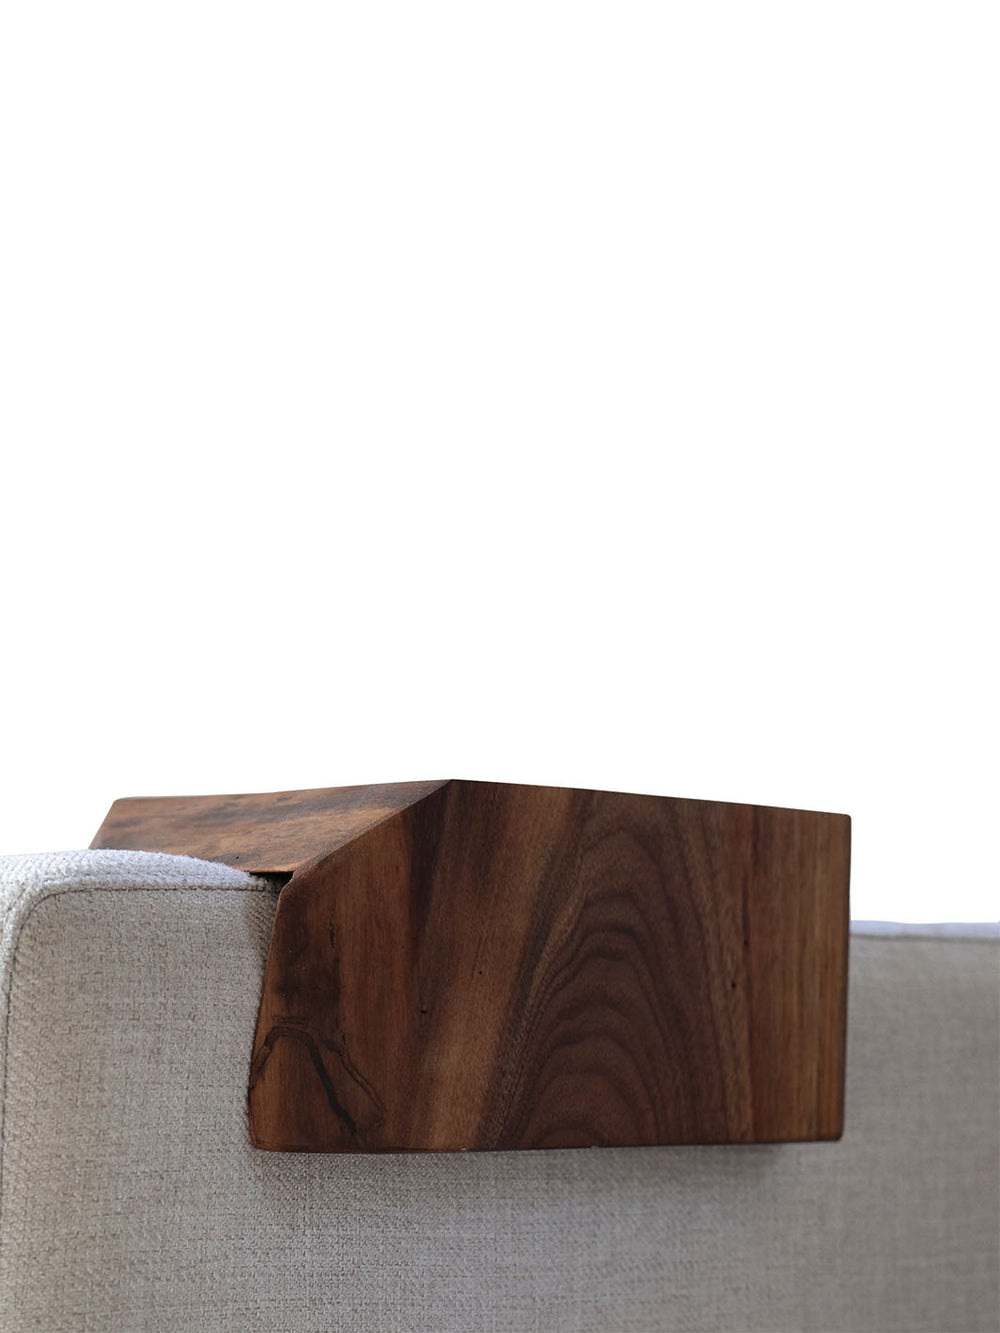 Earthly Comfort Live Edge Walnut Armrest Table Earthly Comfort Coffee Tables-1